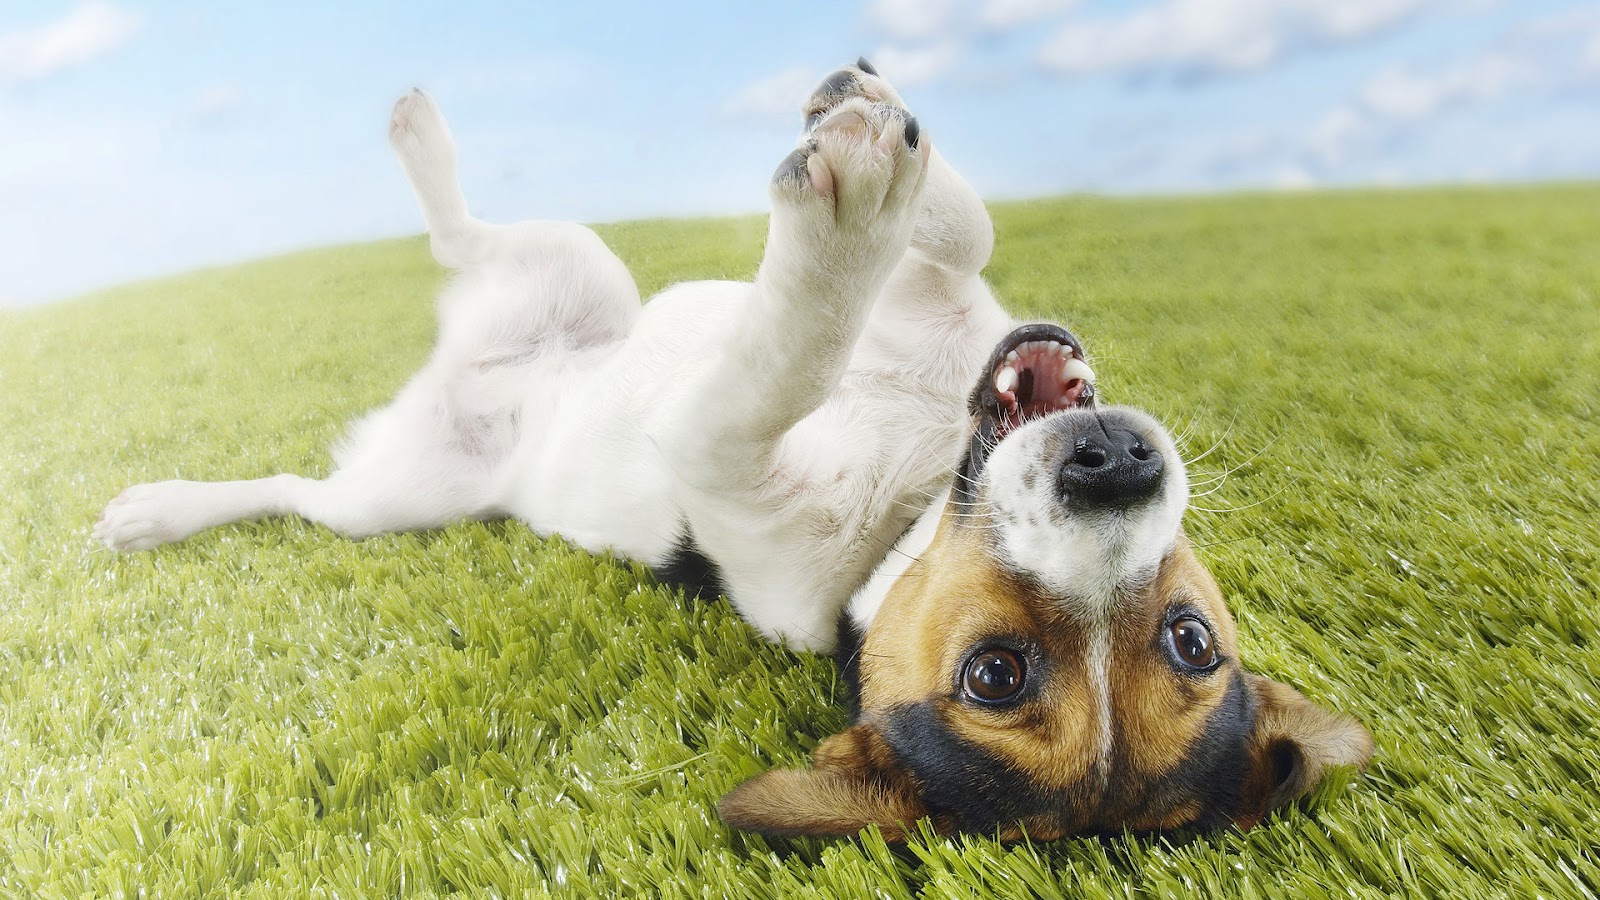 http://4.bp.blogspot.com/-XjAKq2vy8Ds/UCJaRjMi3dI/AAAAAAAAAHQ/NR0MDZZZrPY/s1600/hd-dog-wallpaper-with-a-dog-on-his-back-on-the-grass-hd-dogs-wallpapers-backgrounds.jpg